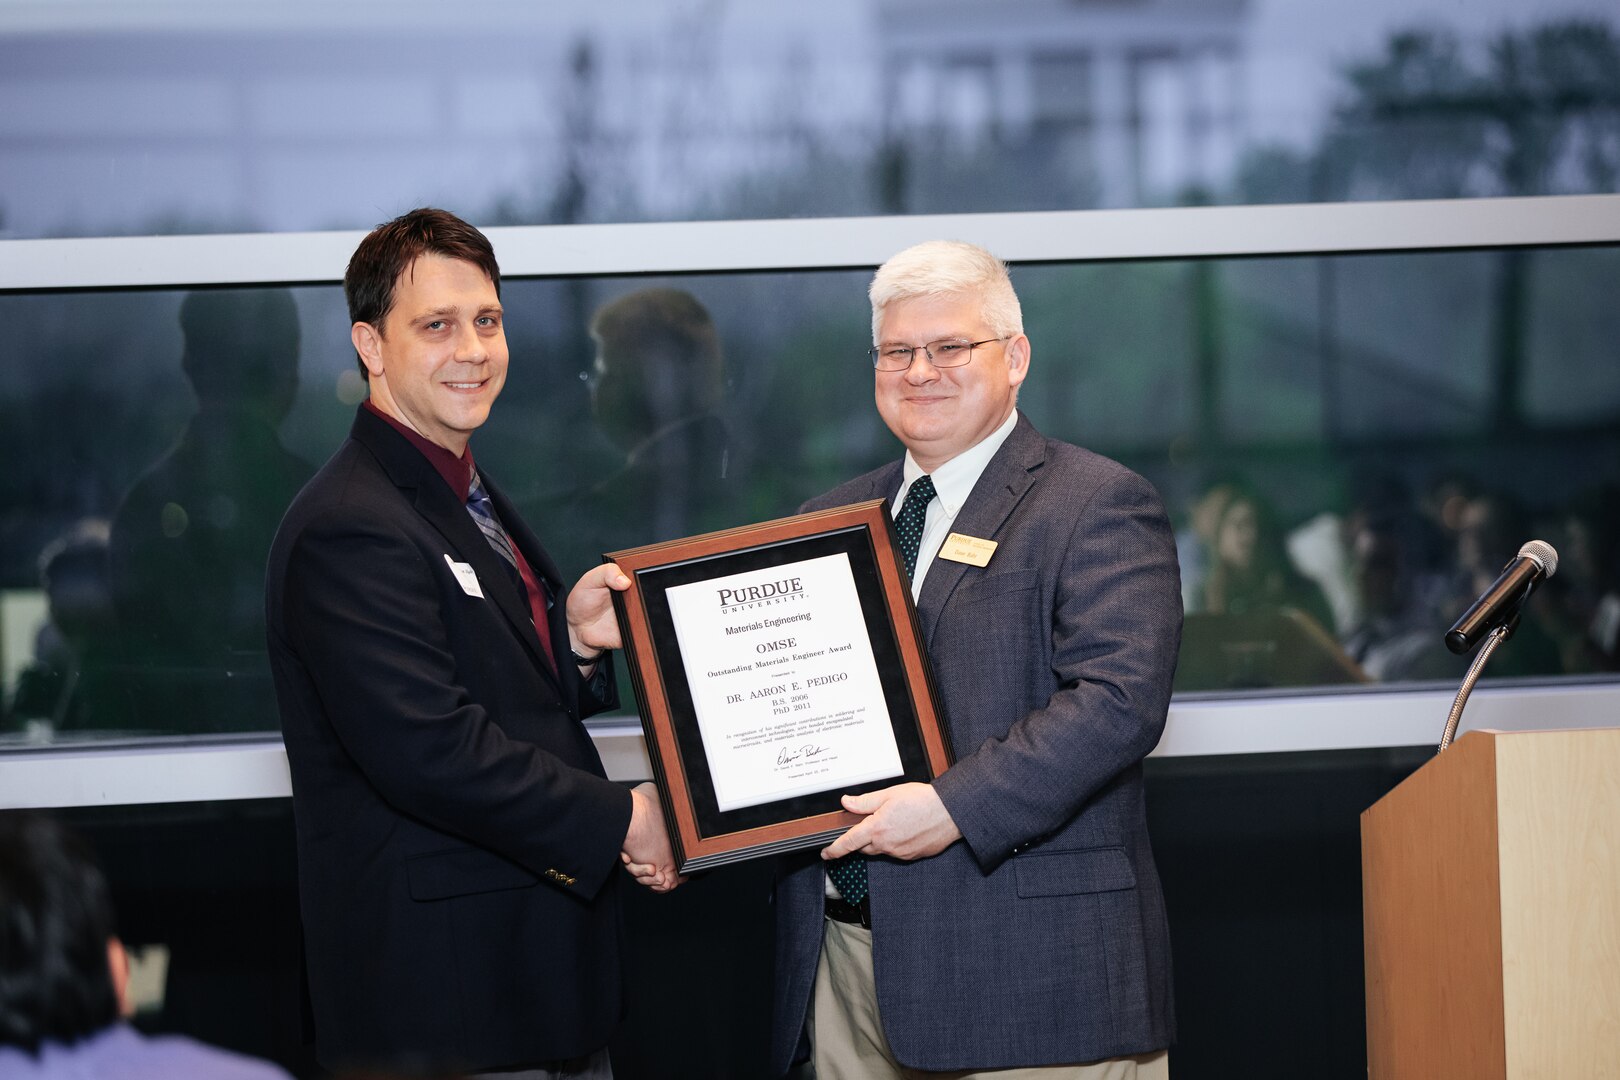 Dr. Aaron Pedigo, a Materials Engineer at NSWC Crane, was recognized with the Outstanding Materials Engineer (OMSE) award for demonstrating exemplary accomplishments and leadership in his field.